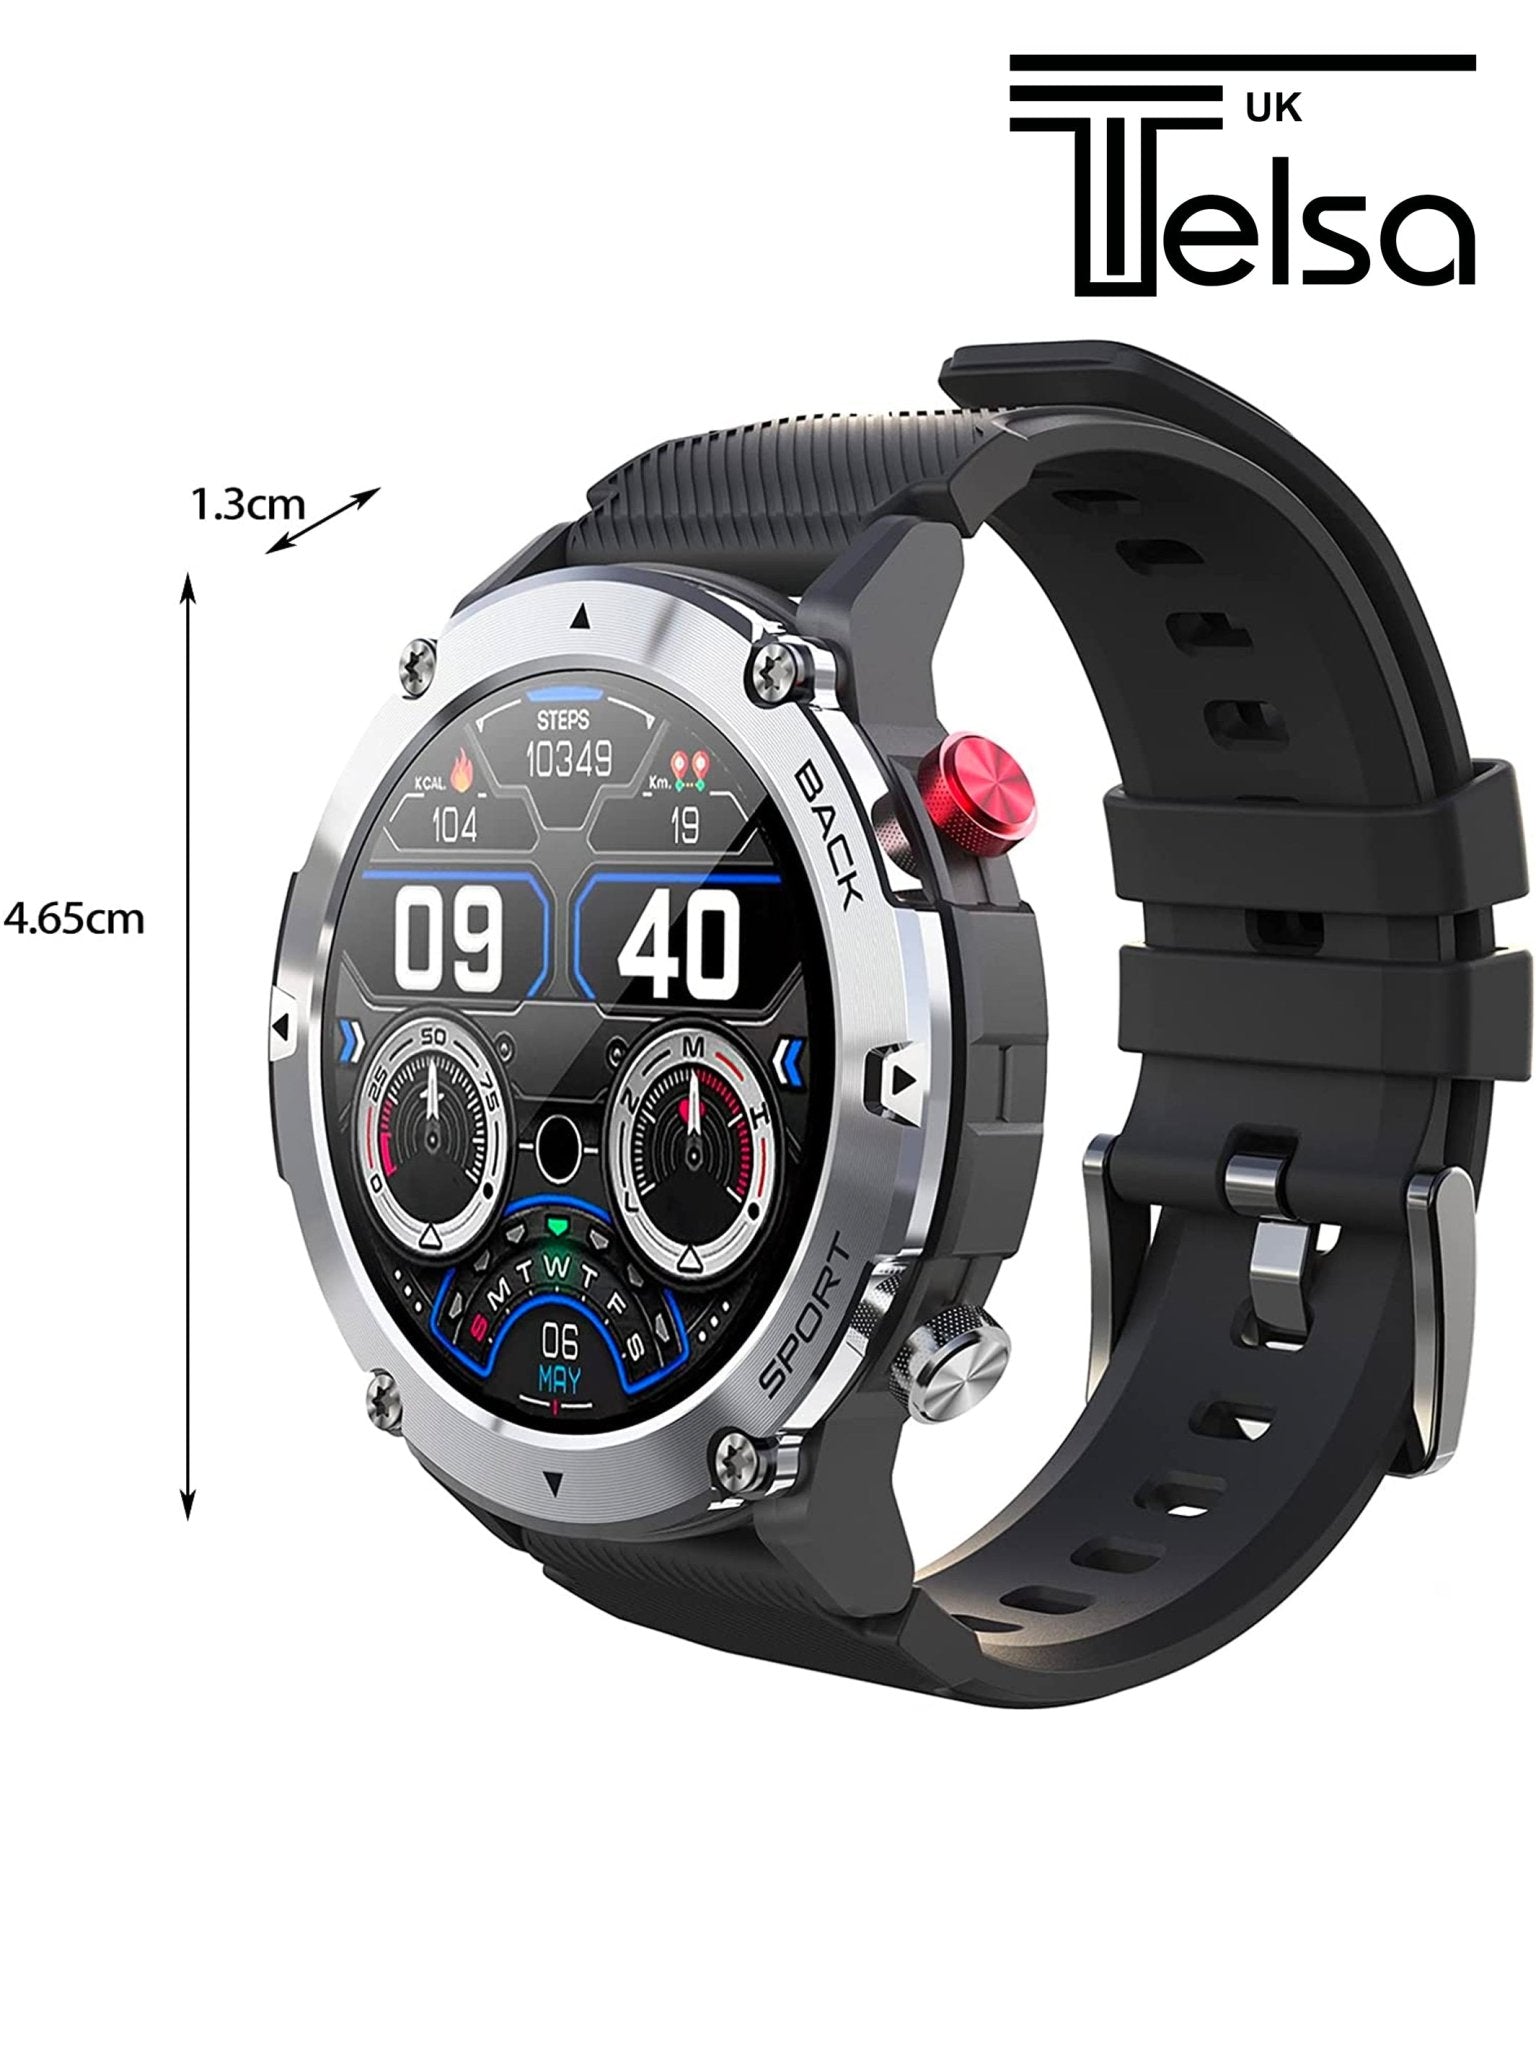 4elementsclothingTelsaTELSA UK - Smart Watch Waterproof T4EC Alloy military style mens Sports & fitness digital Watch with Touch Screen display, Fitness Watch, Heart Rate, Step counter Smart Watch for men IOS & AndroidWatch5060976970382